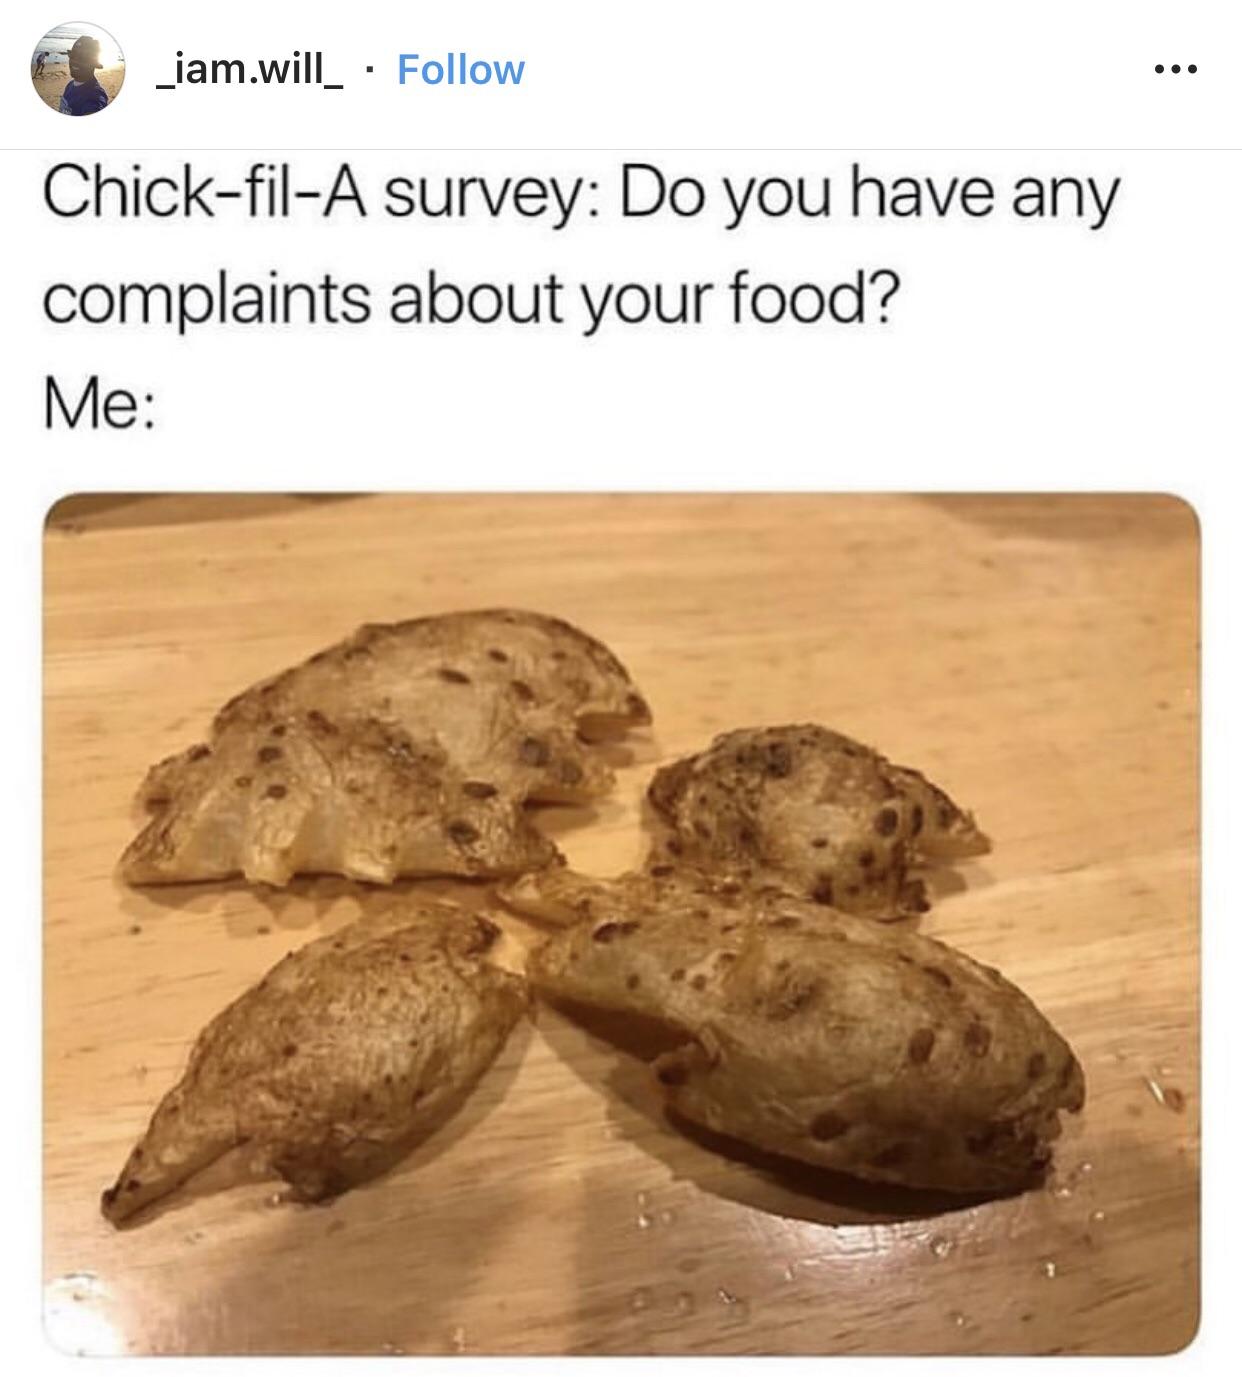 chick fil a complaint meme - _iam.will_ ChickfilA survey Do you have any complaints about your food? Me